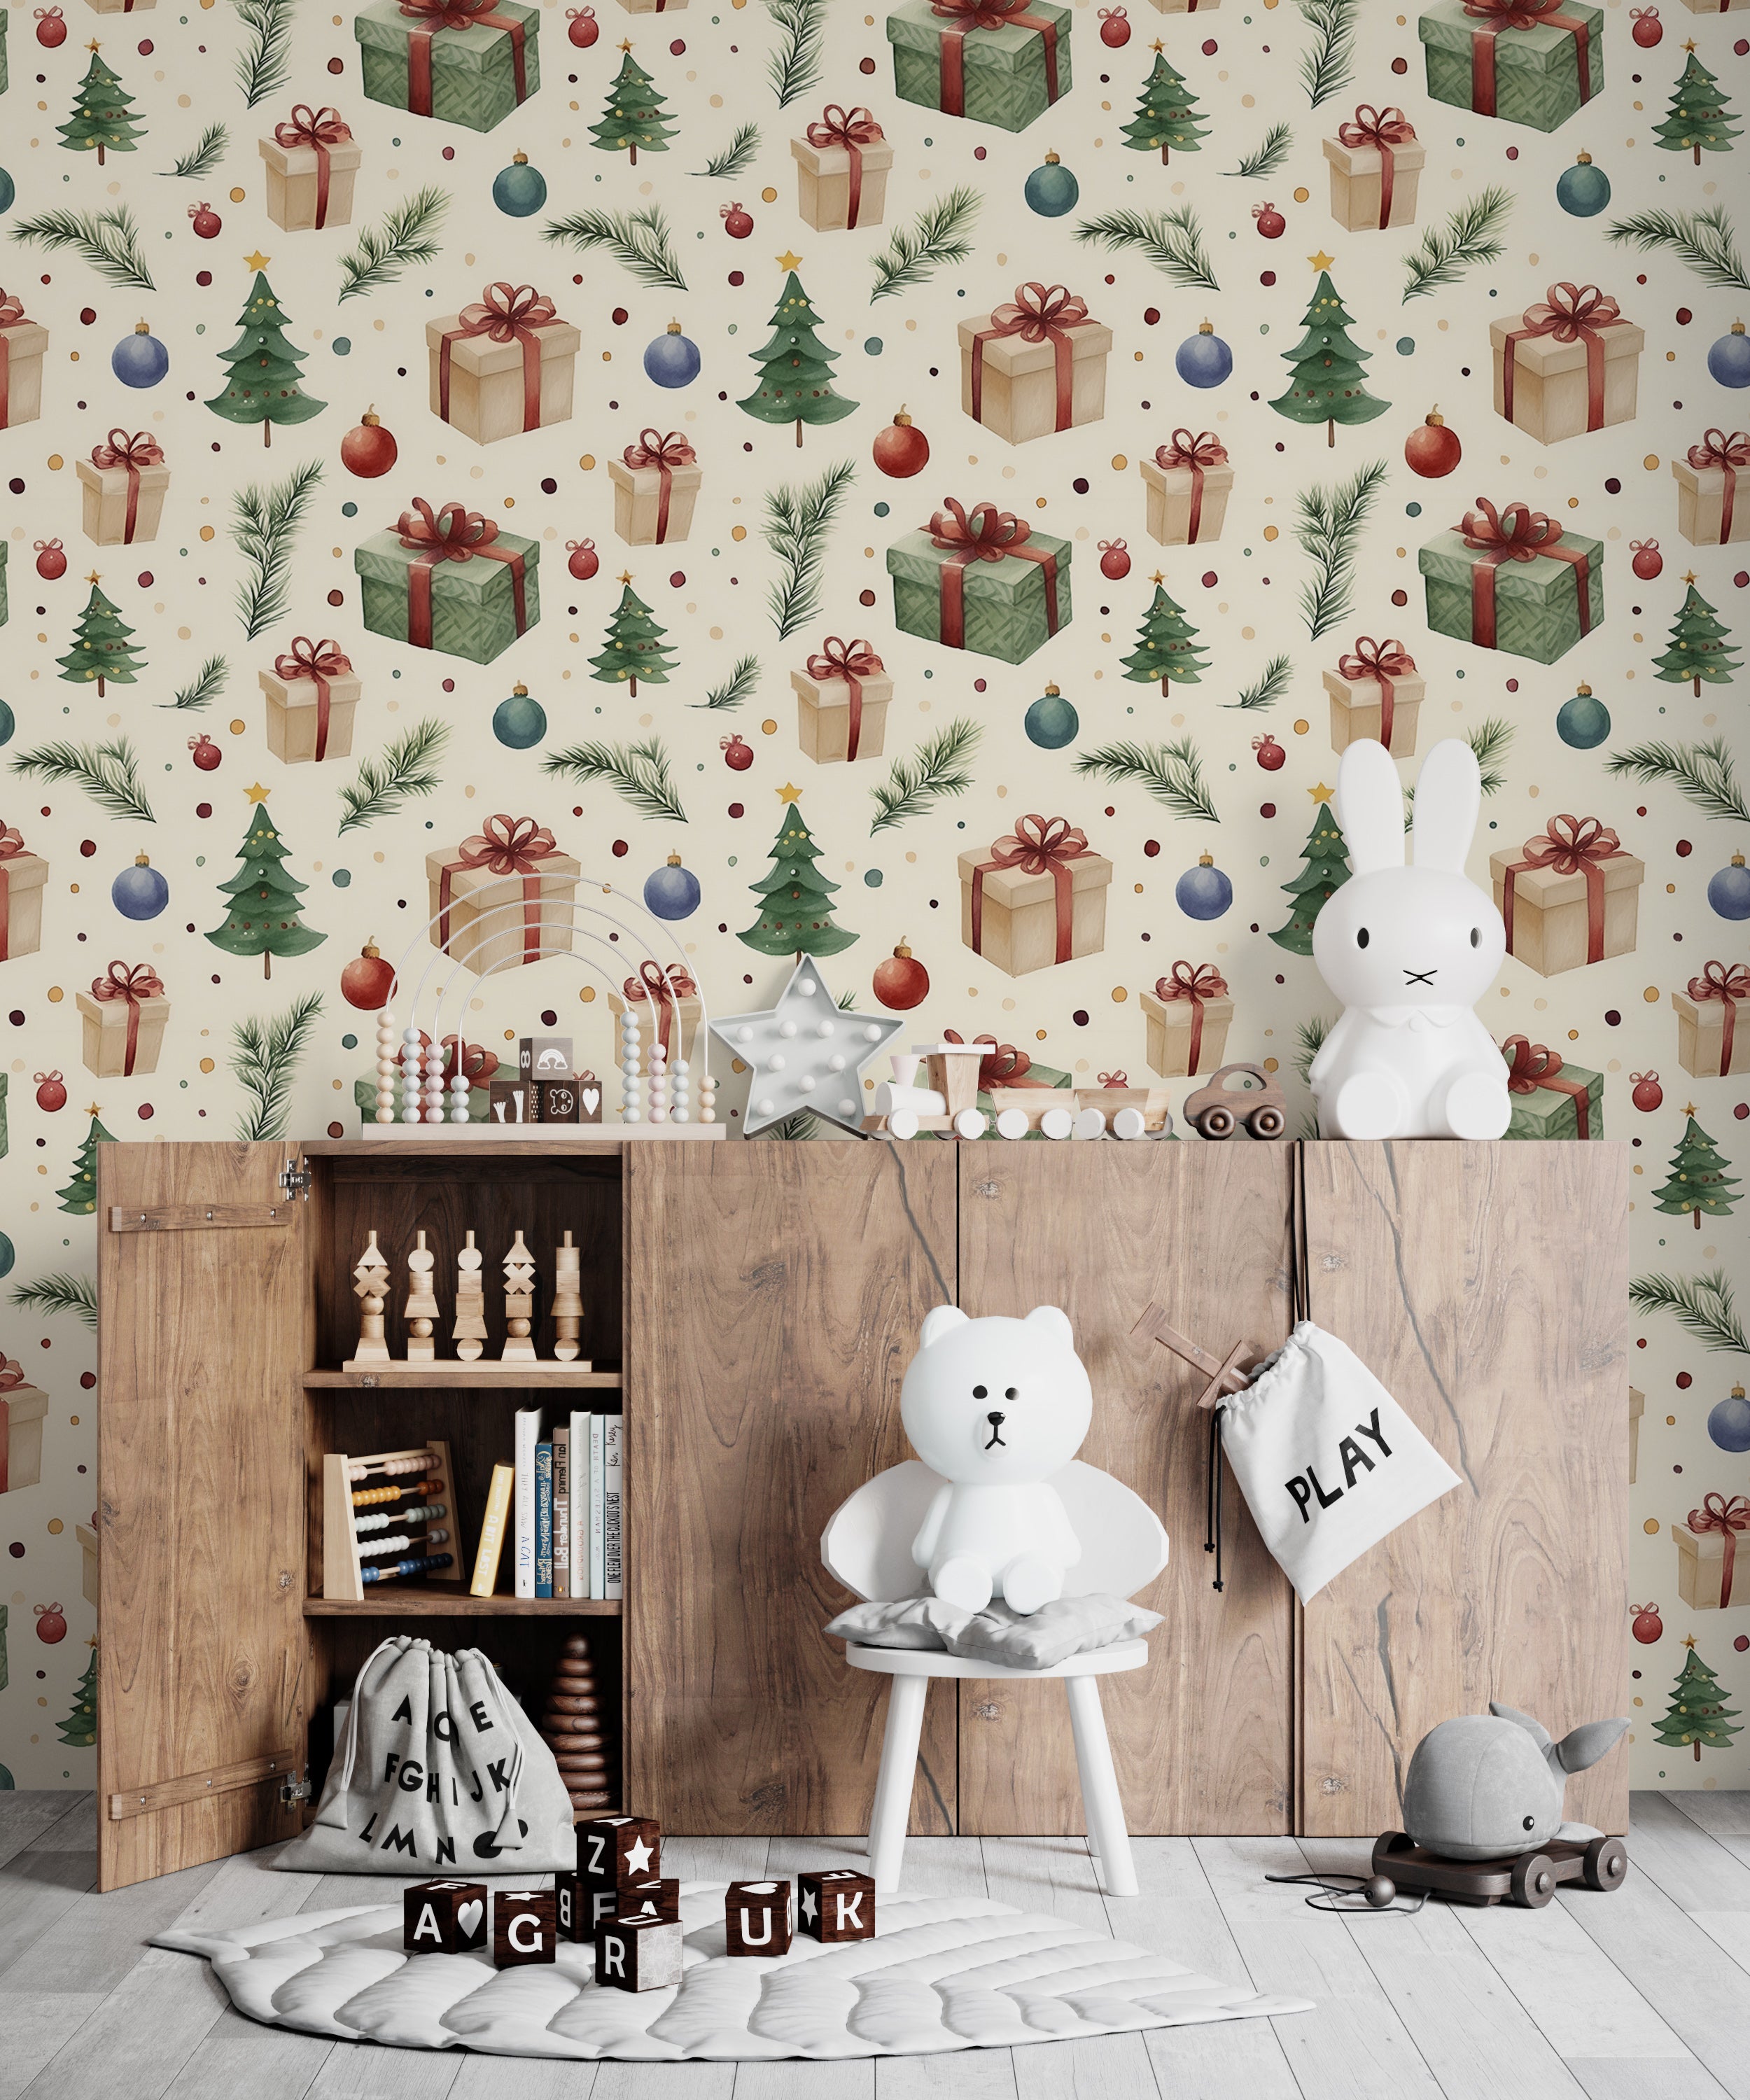 Festive Holiday Wallpaper for Home